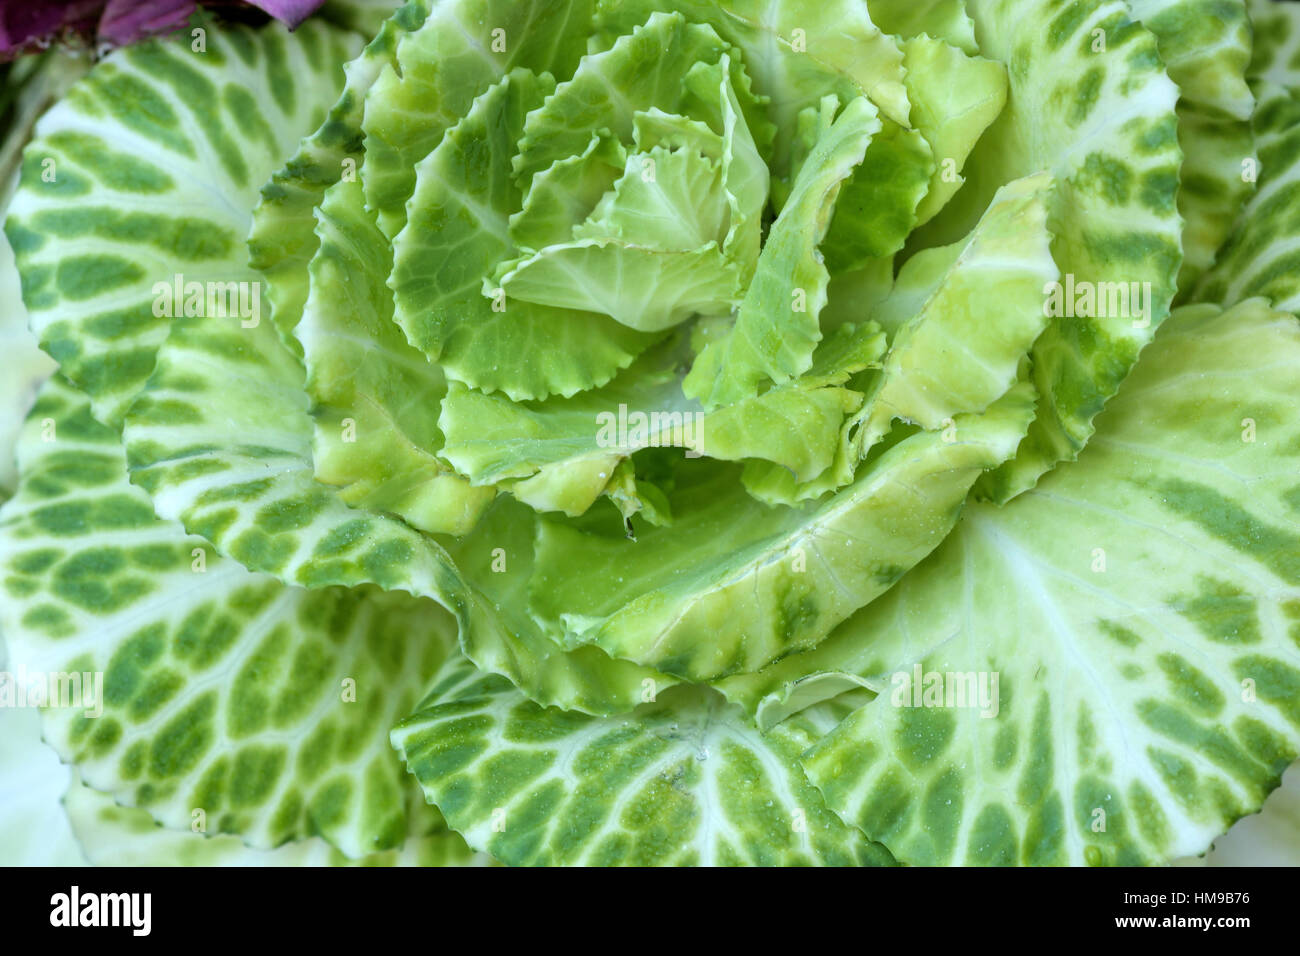 fresh green cabbage plant up close with no background Stock Photo